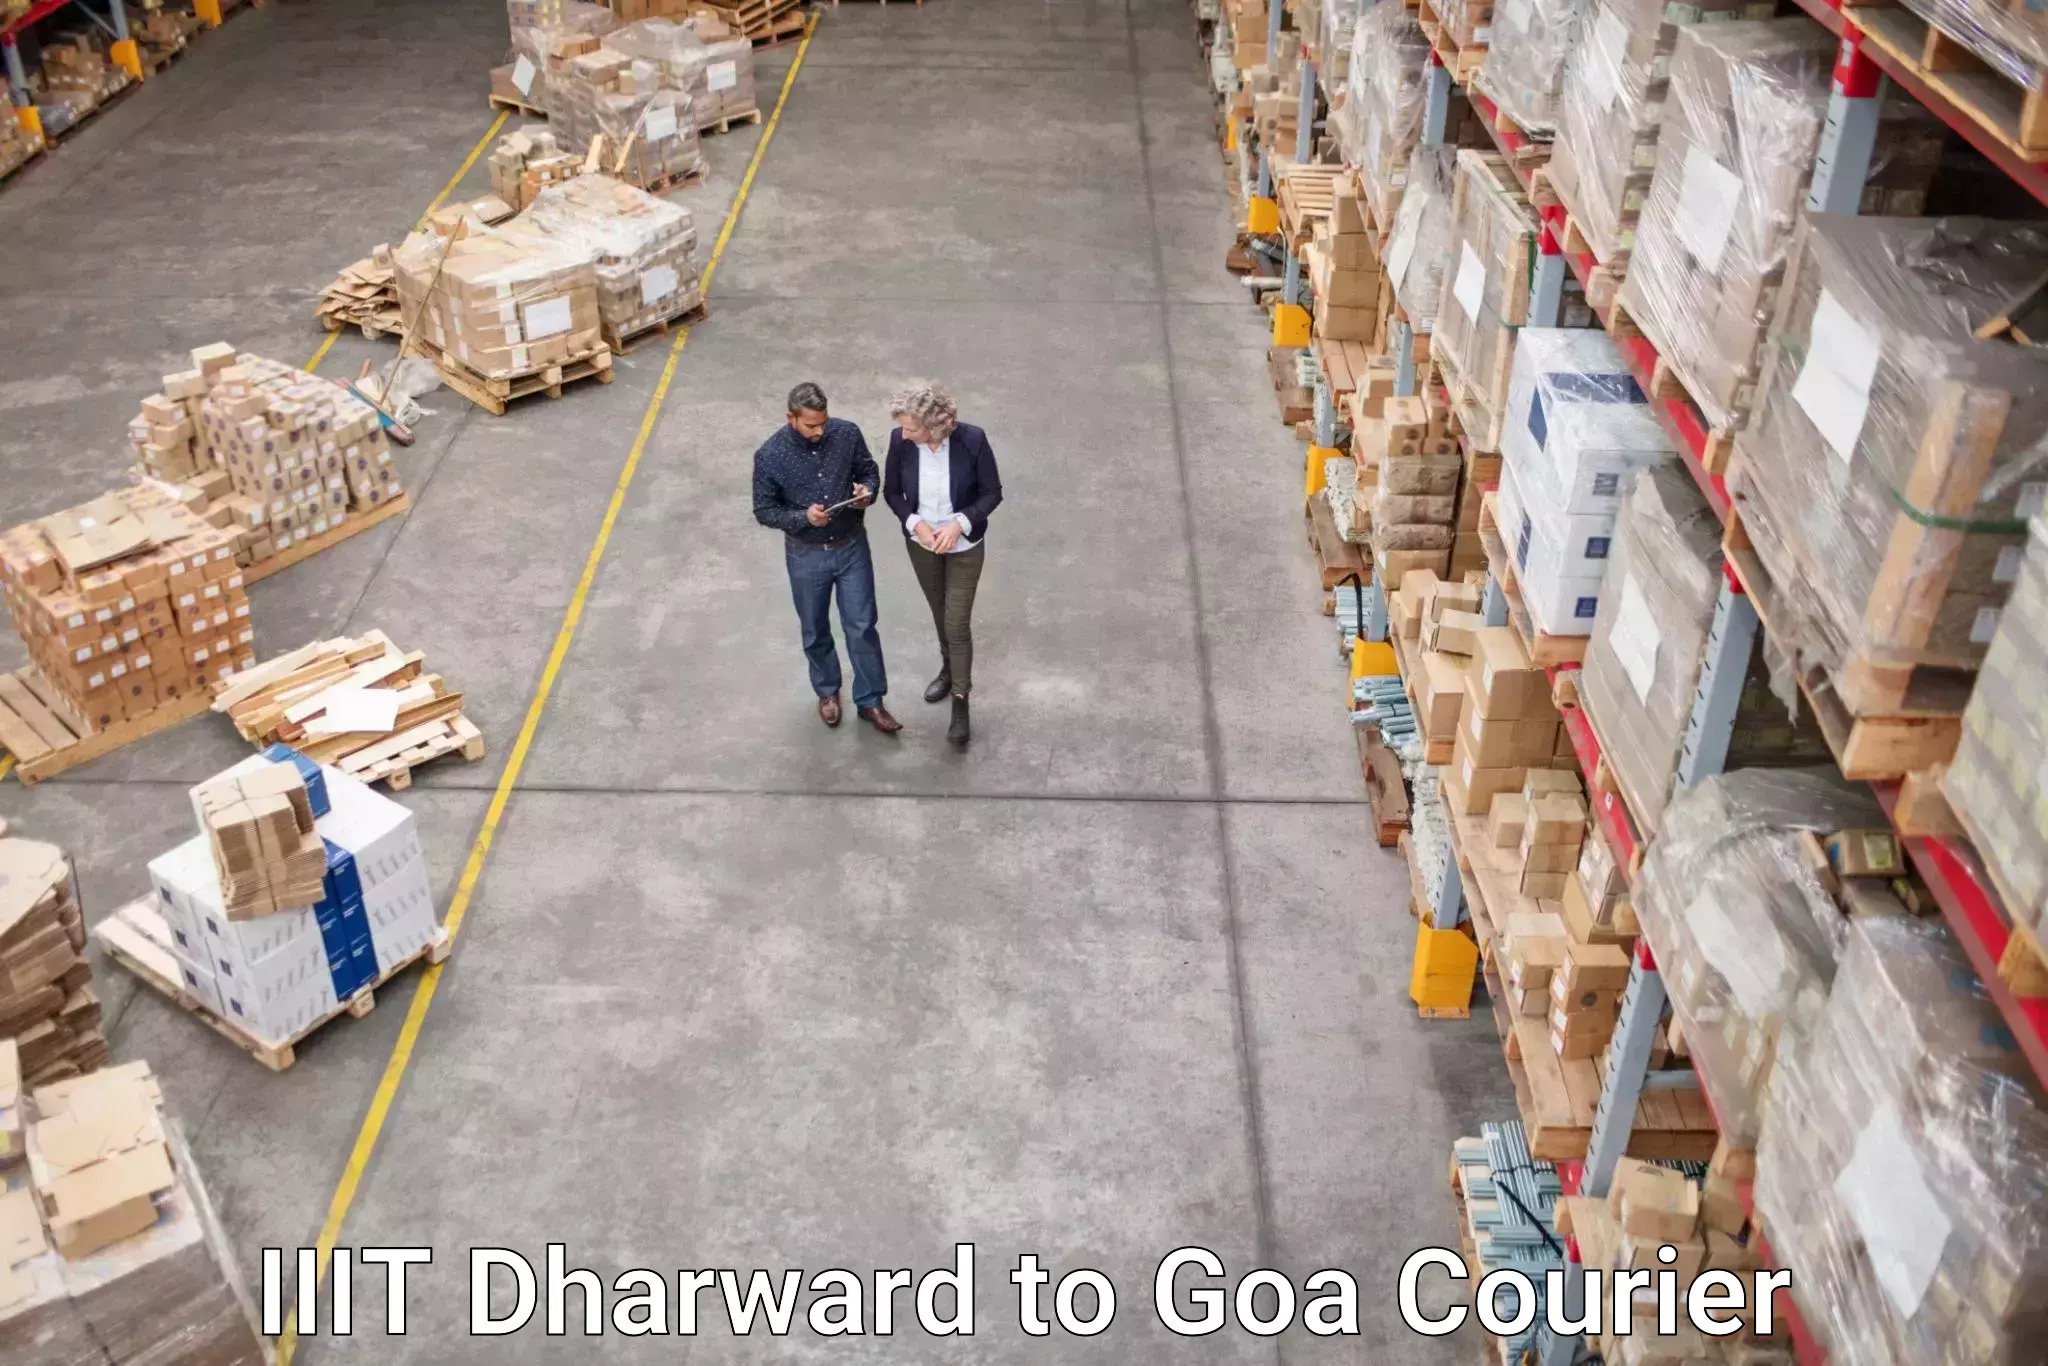 Express package delivery IIIT Dharward to Goa